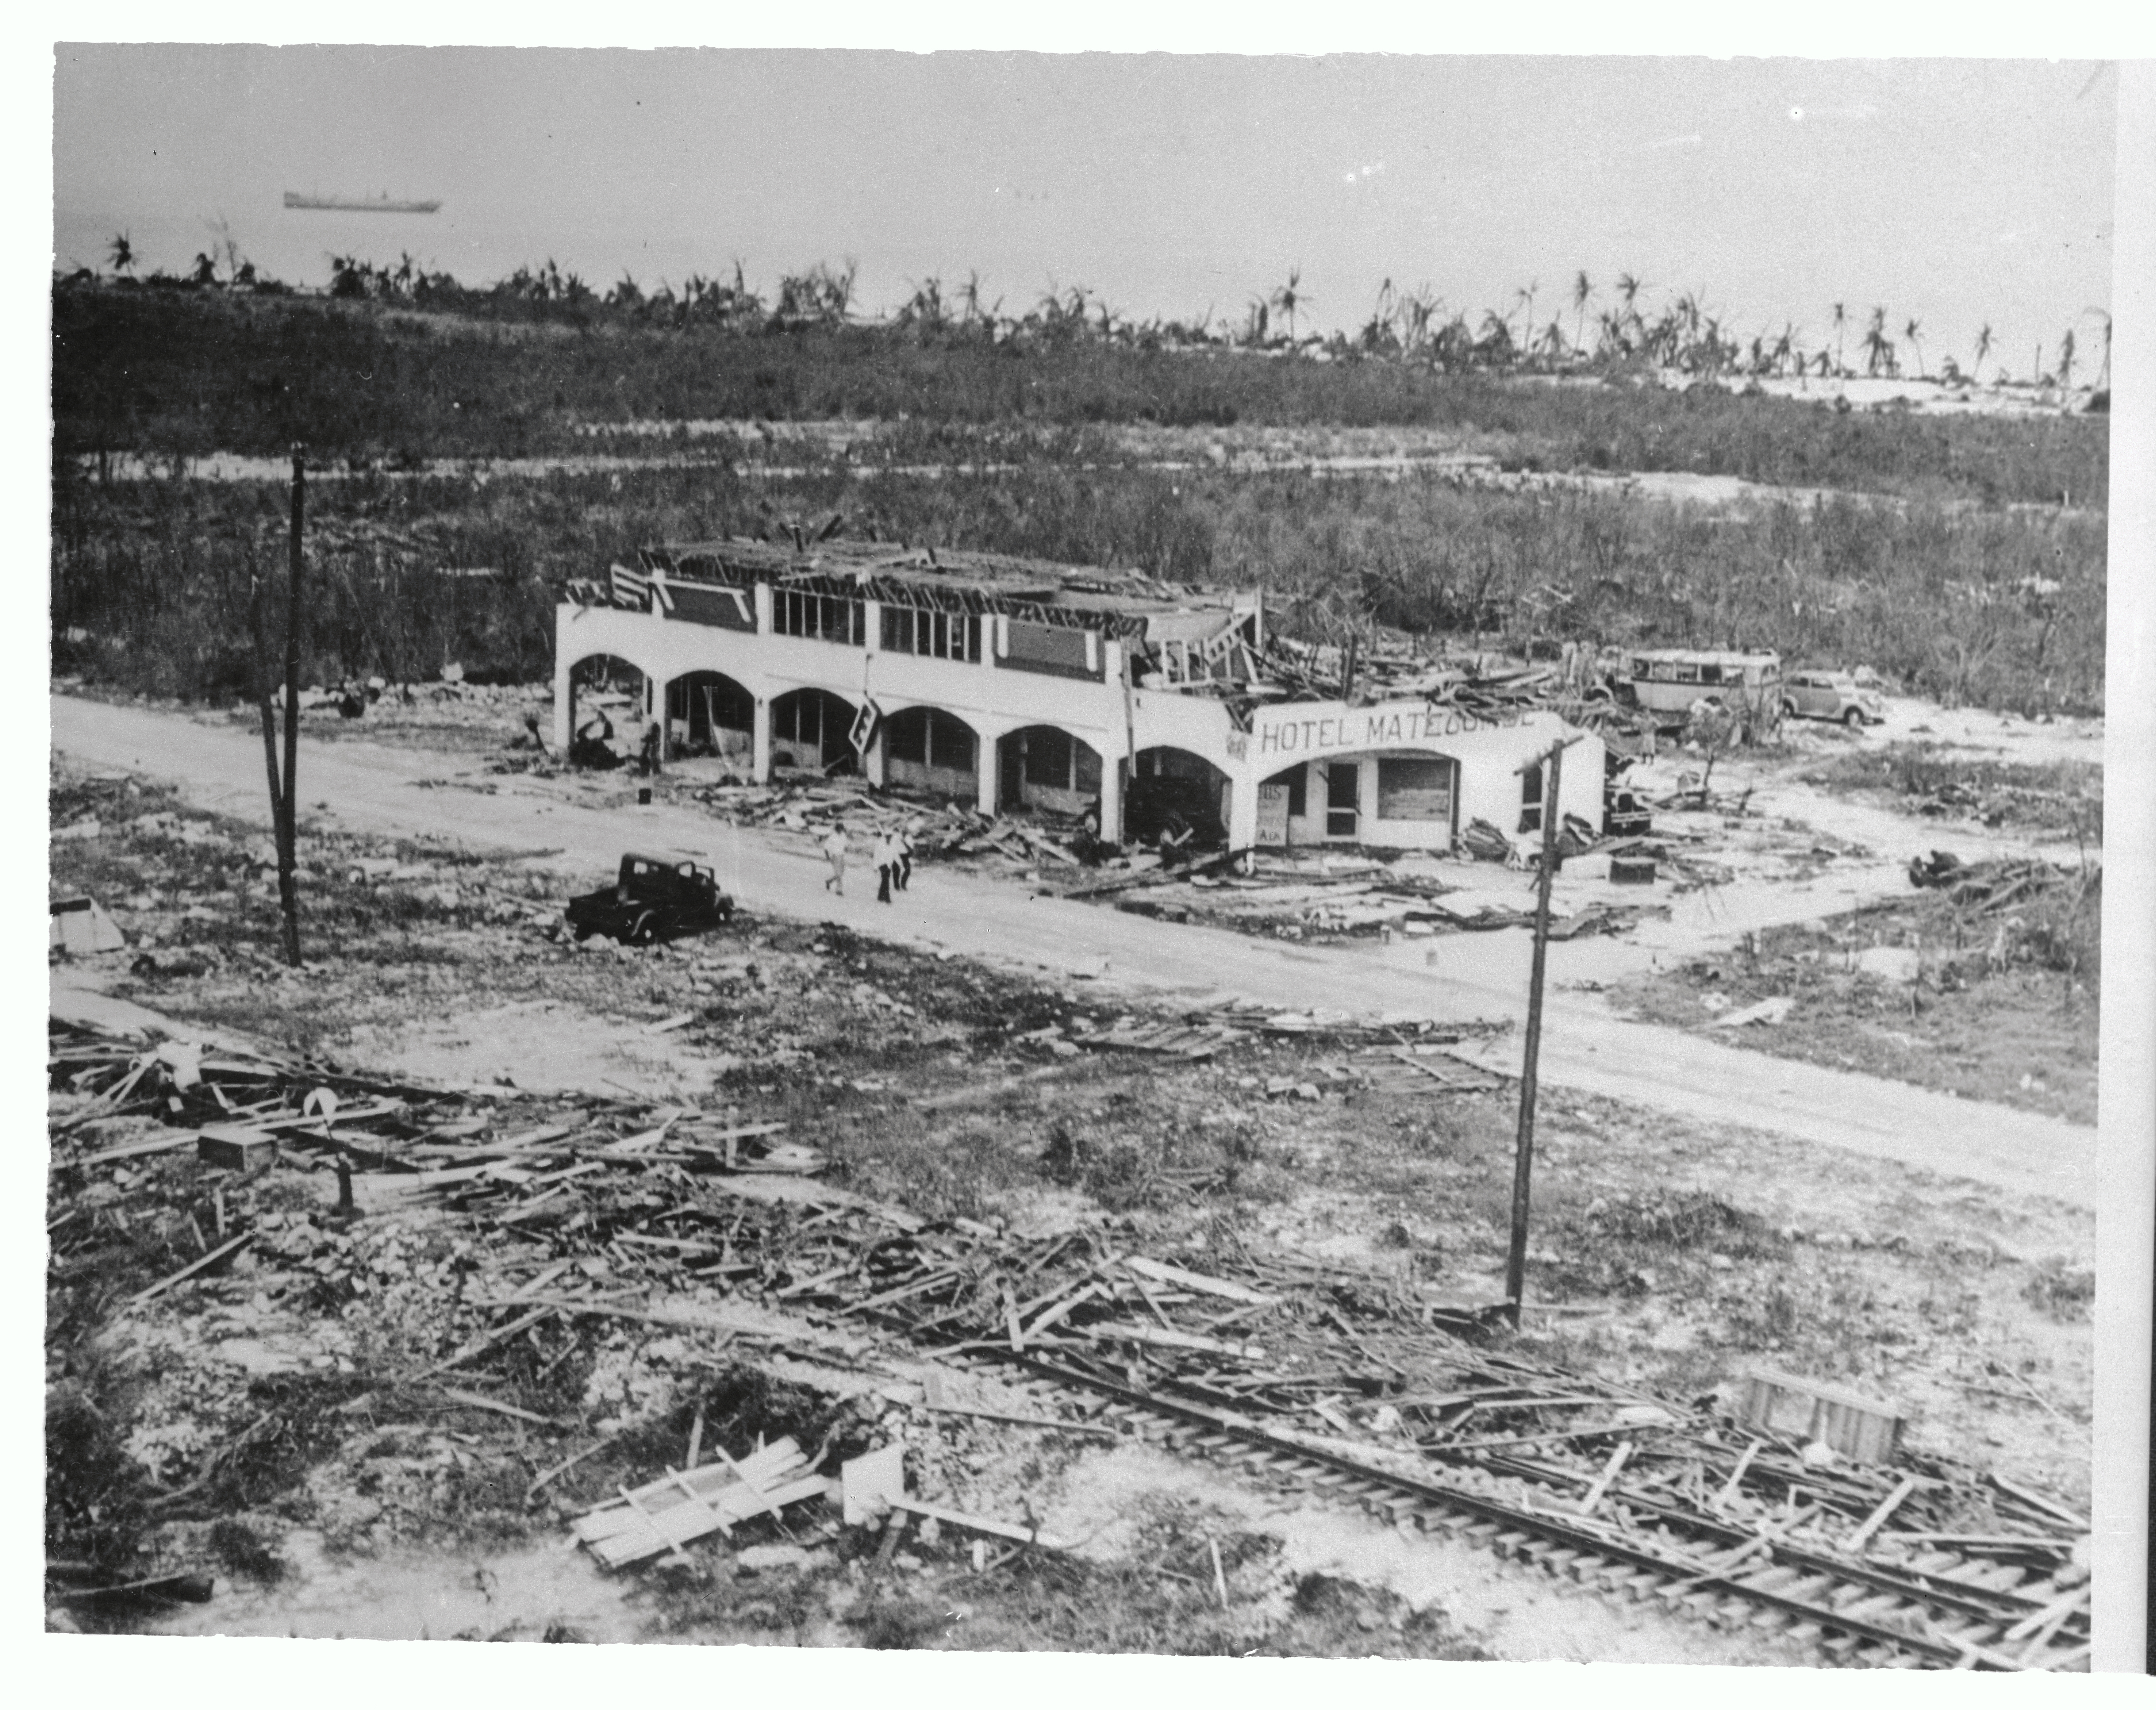 A hotel in Matecumbe Key, Florida, is reduced to rubble as seen in this Sept. 7, 1935 photo after an unnamed category 5 hurricane swept through the Florida Keys during Labor Day. All along the Keys are scenes like this, bearing grim evidence of the fury that snuffed out 300 lives.